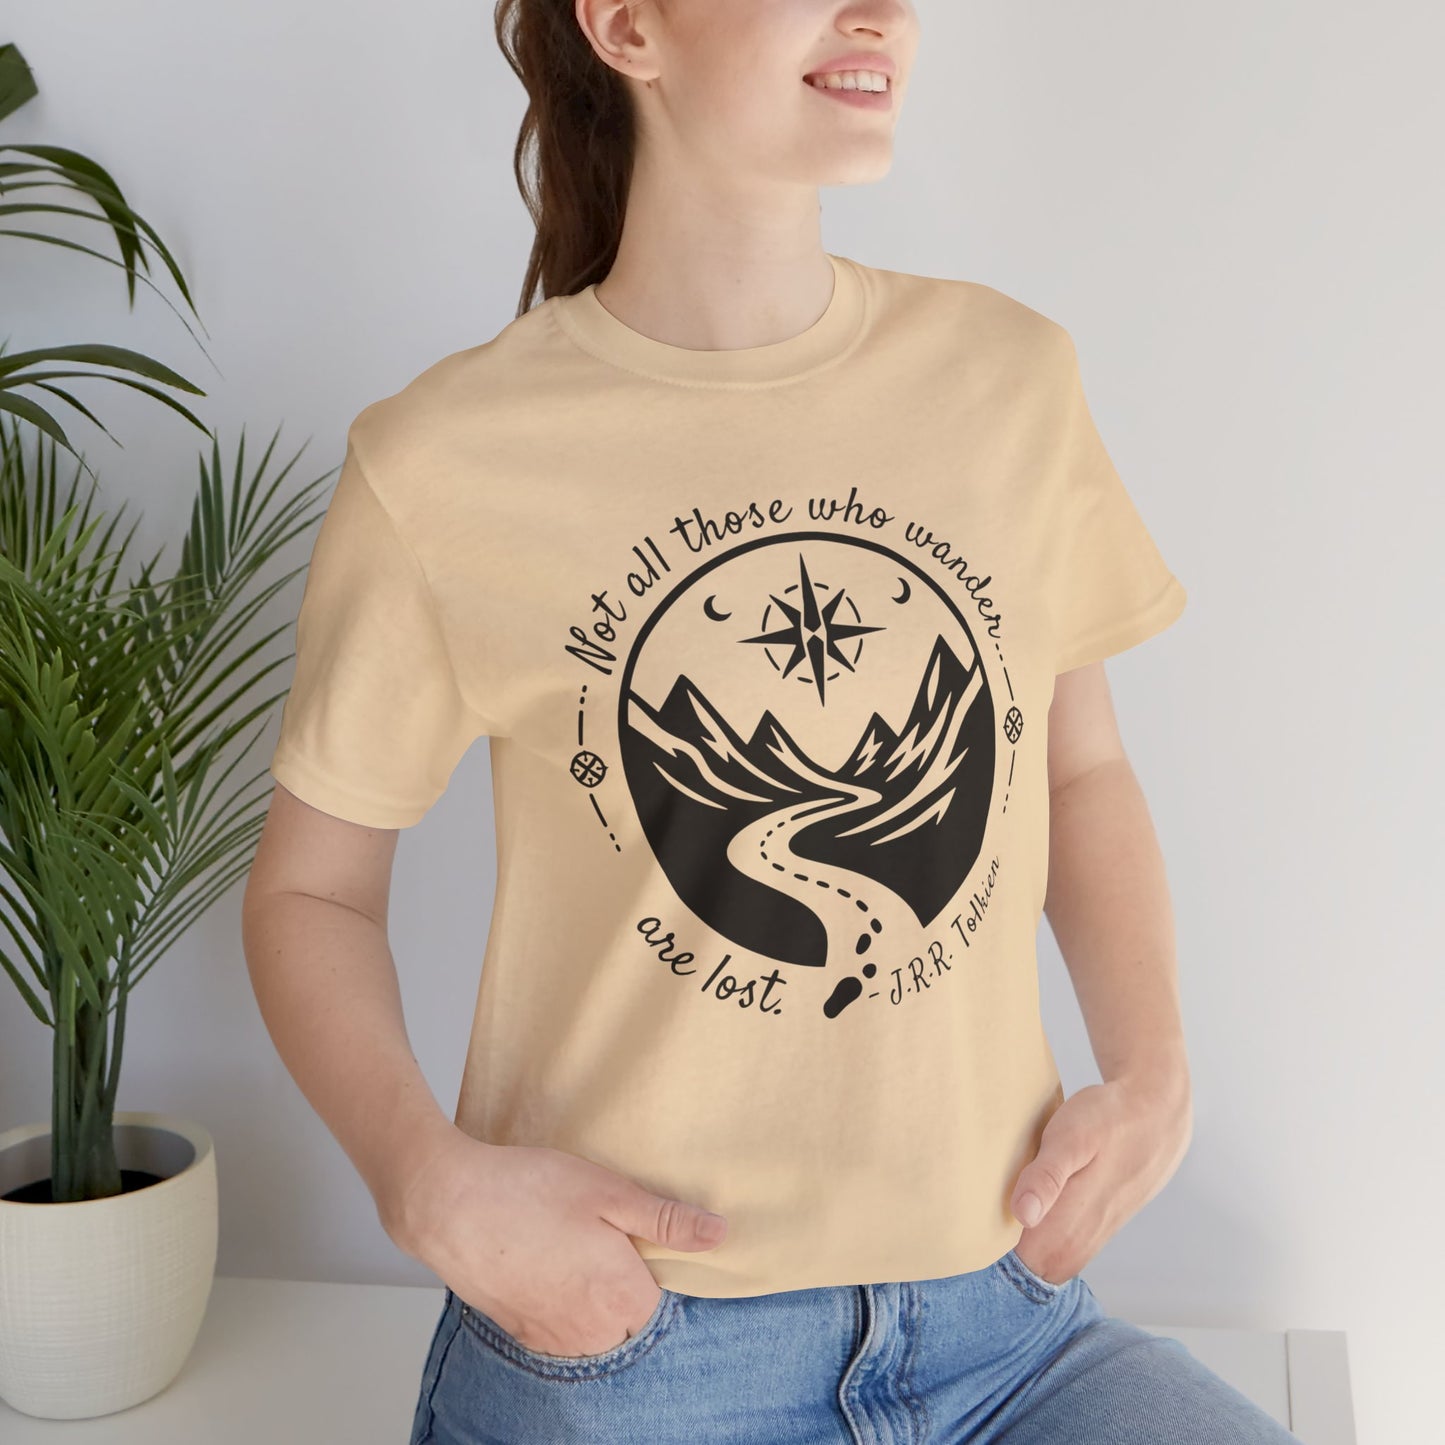 "Not all those who wander..." Tolkien Quote Short Sleeve Tee